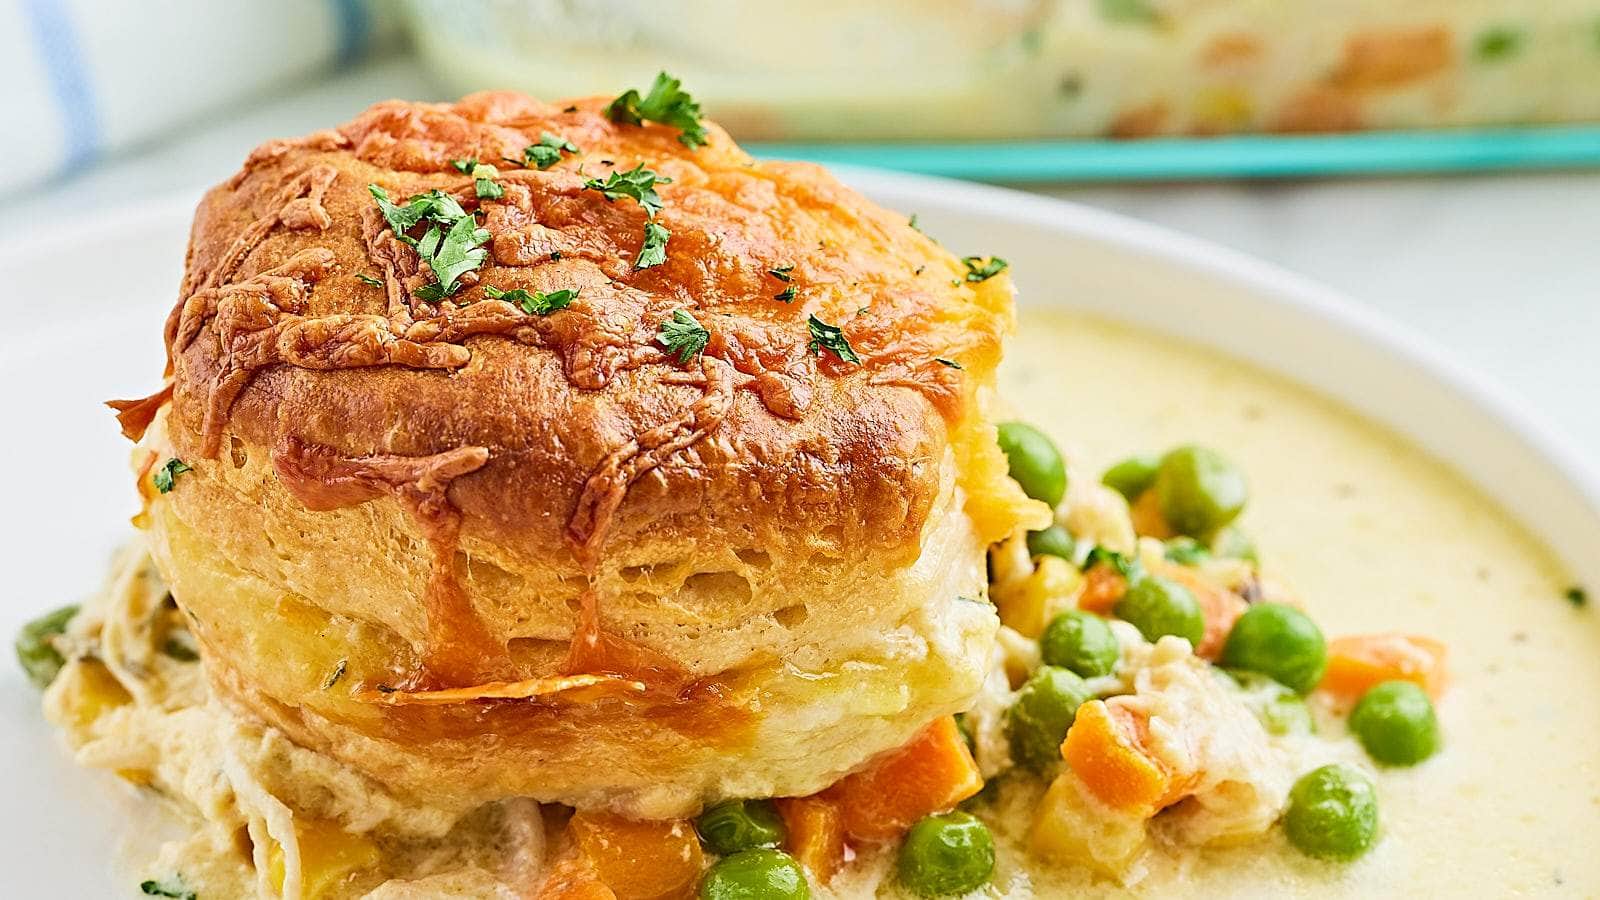 <p>This Chicken Pot Pie Casserole is a surefire hit, turning your casserole dish into a treasure trove of comforting flavors. With tender chicken, a creamy sauce, and a golden crust, it's comfort food at its finest.</p><p><strong>Get the Recipe: <a href="https://cheerfulcook.com/cheesy-chicken-pot-pie-casserole/" rel="noreferrer noopener">Chicken Pot Pie Casserole</a></strong></p>